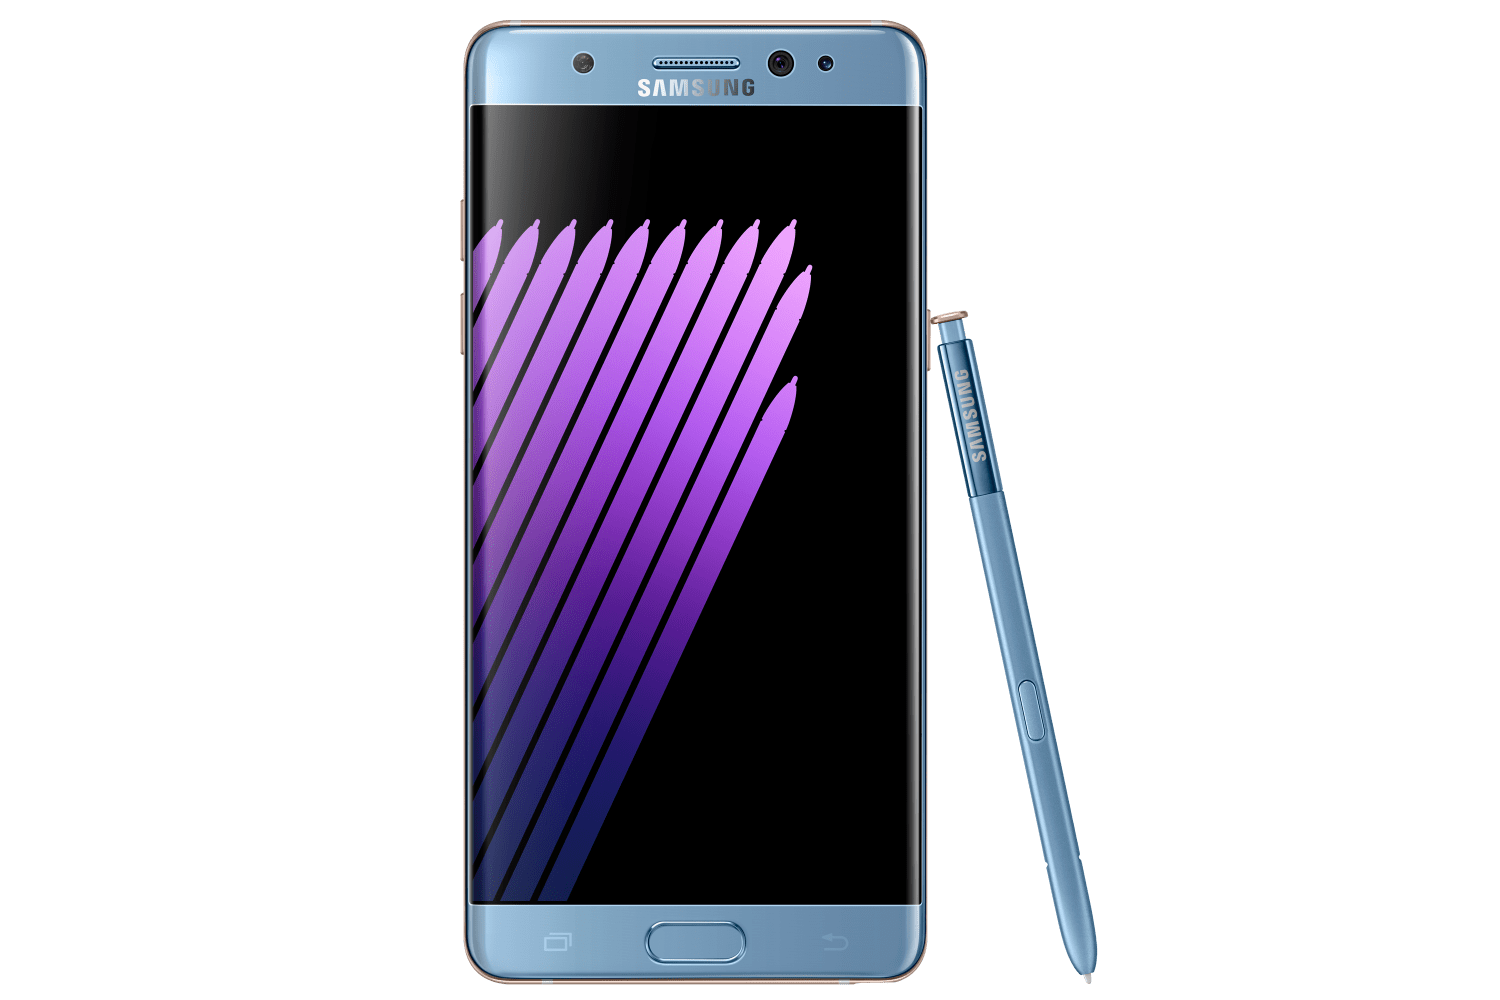 Here's the Samsung Galaxy Note 7